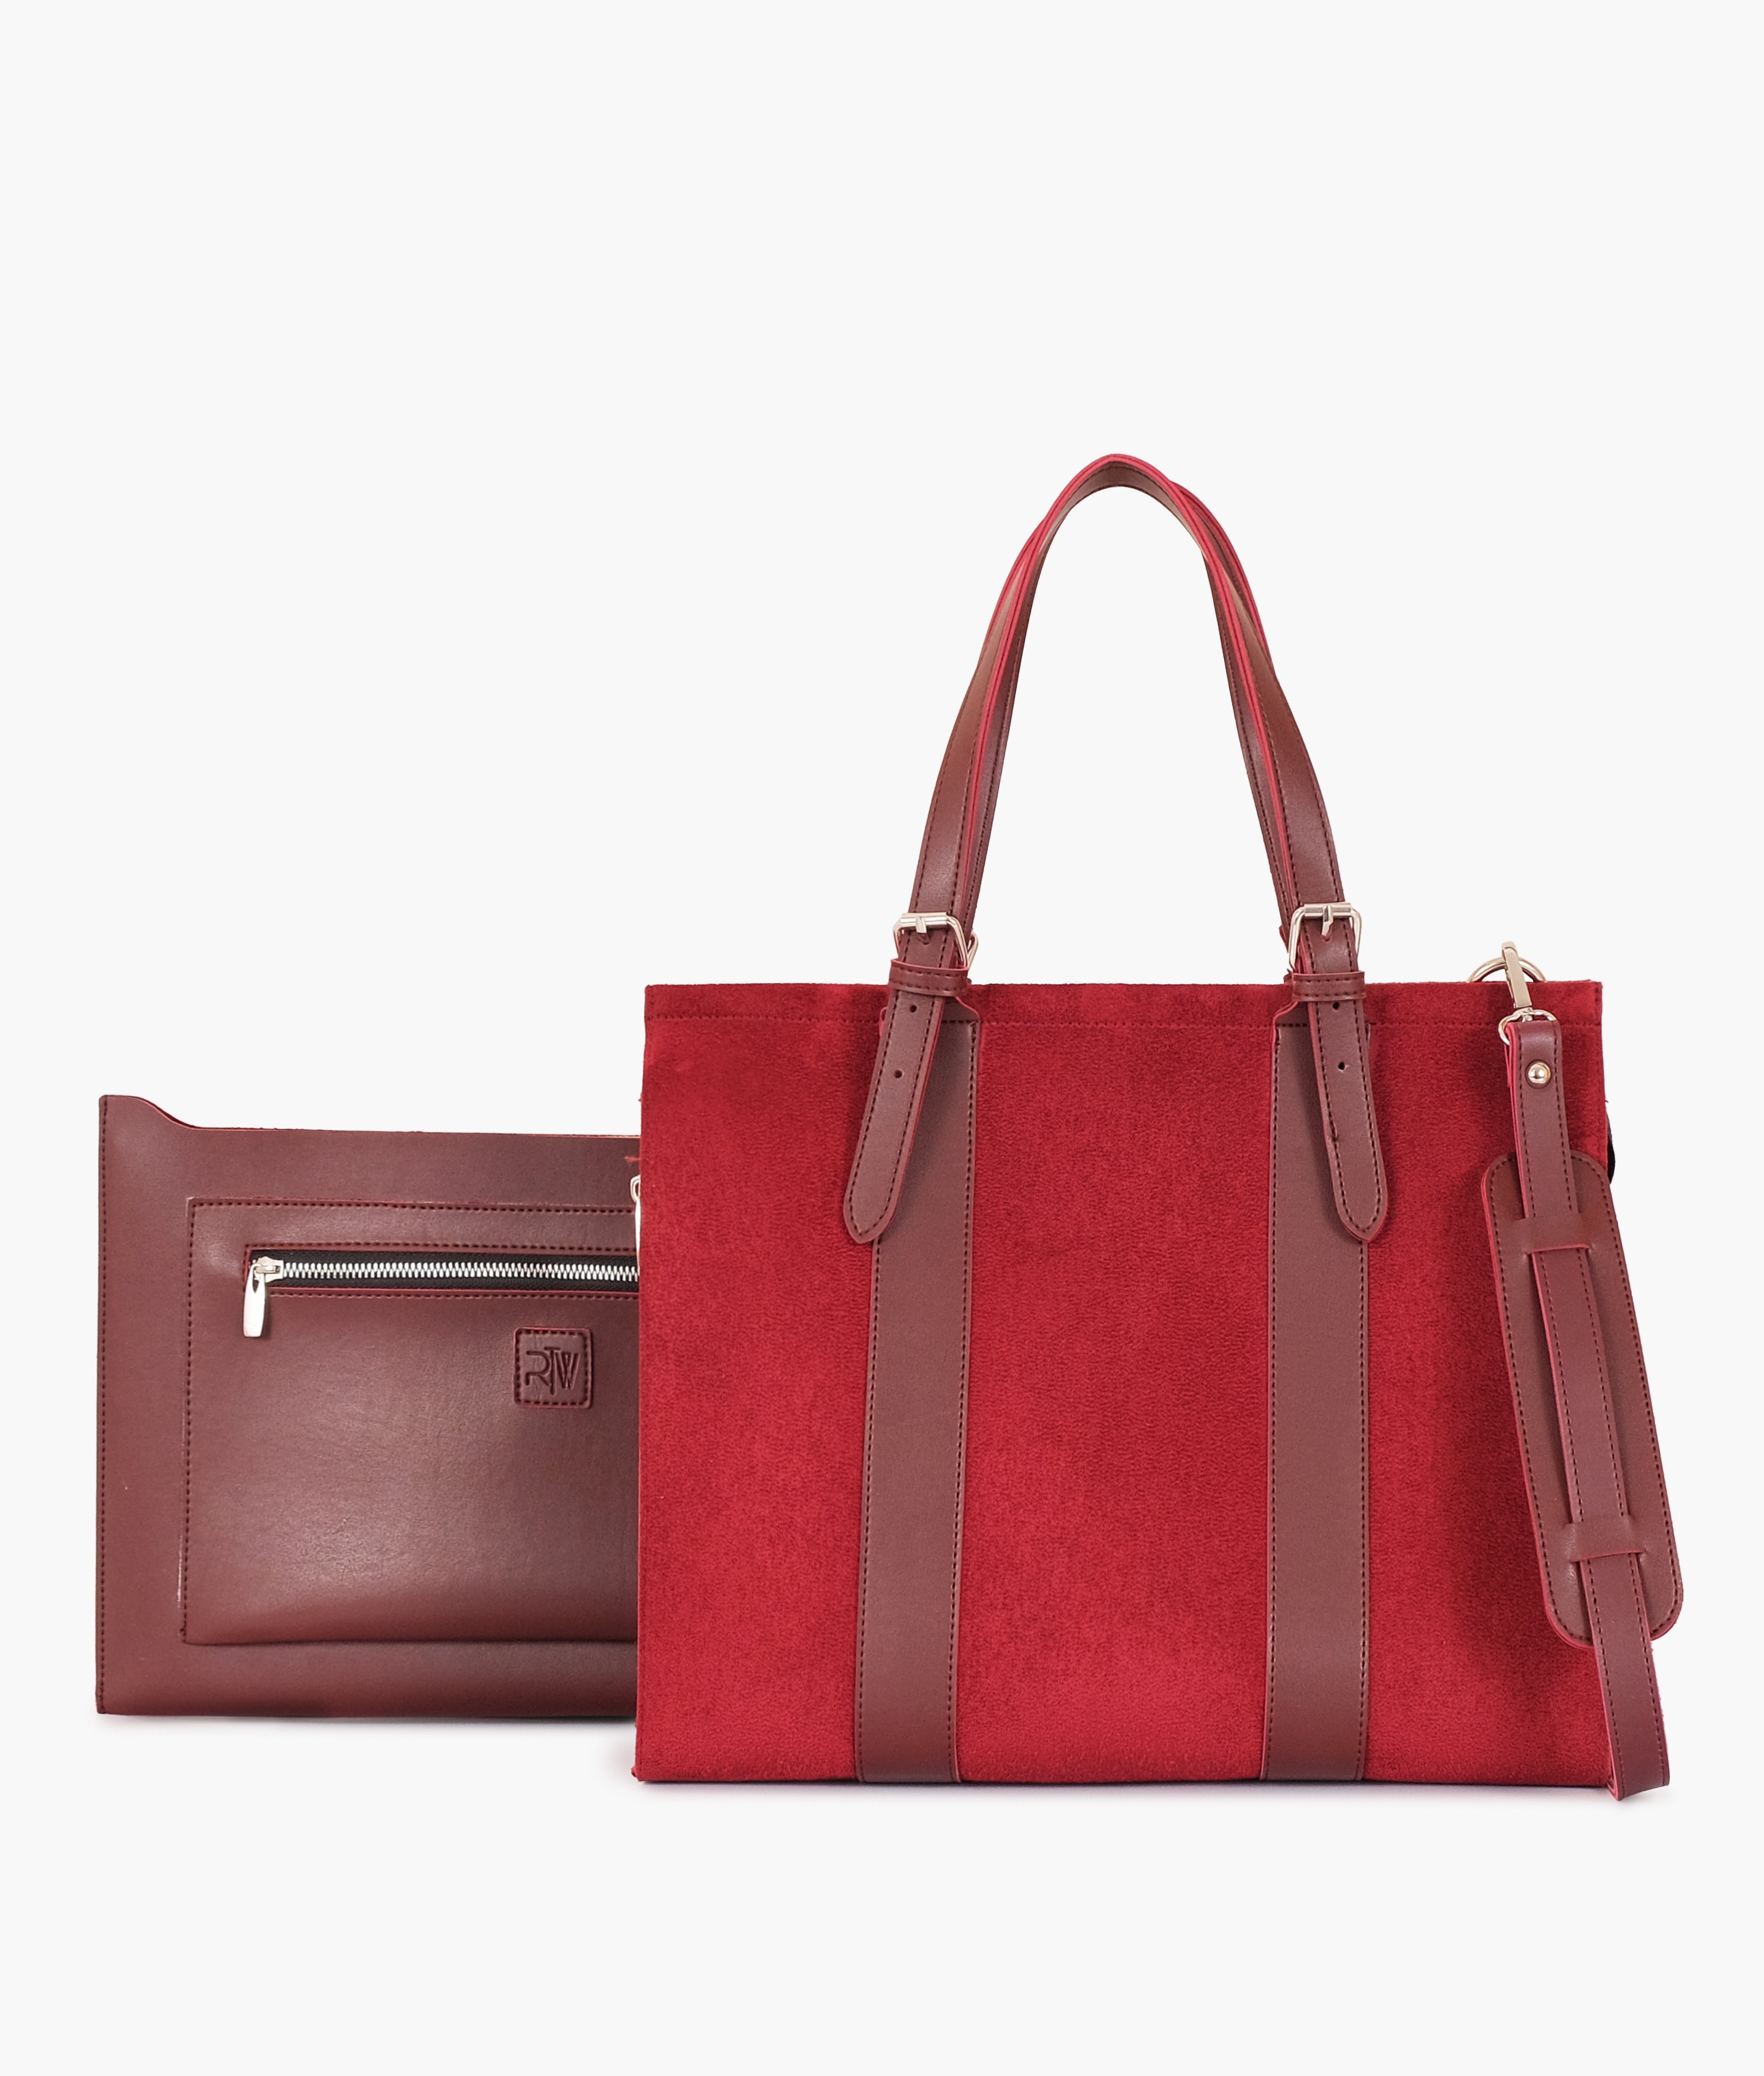 Burgundy suede laptop bag with sleeve